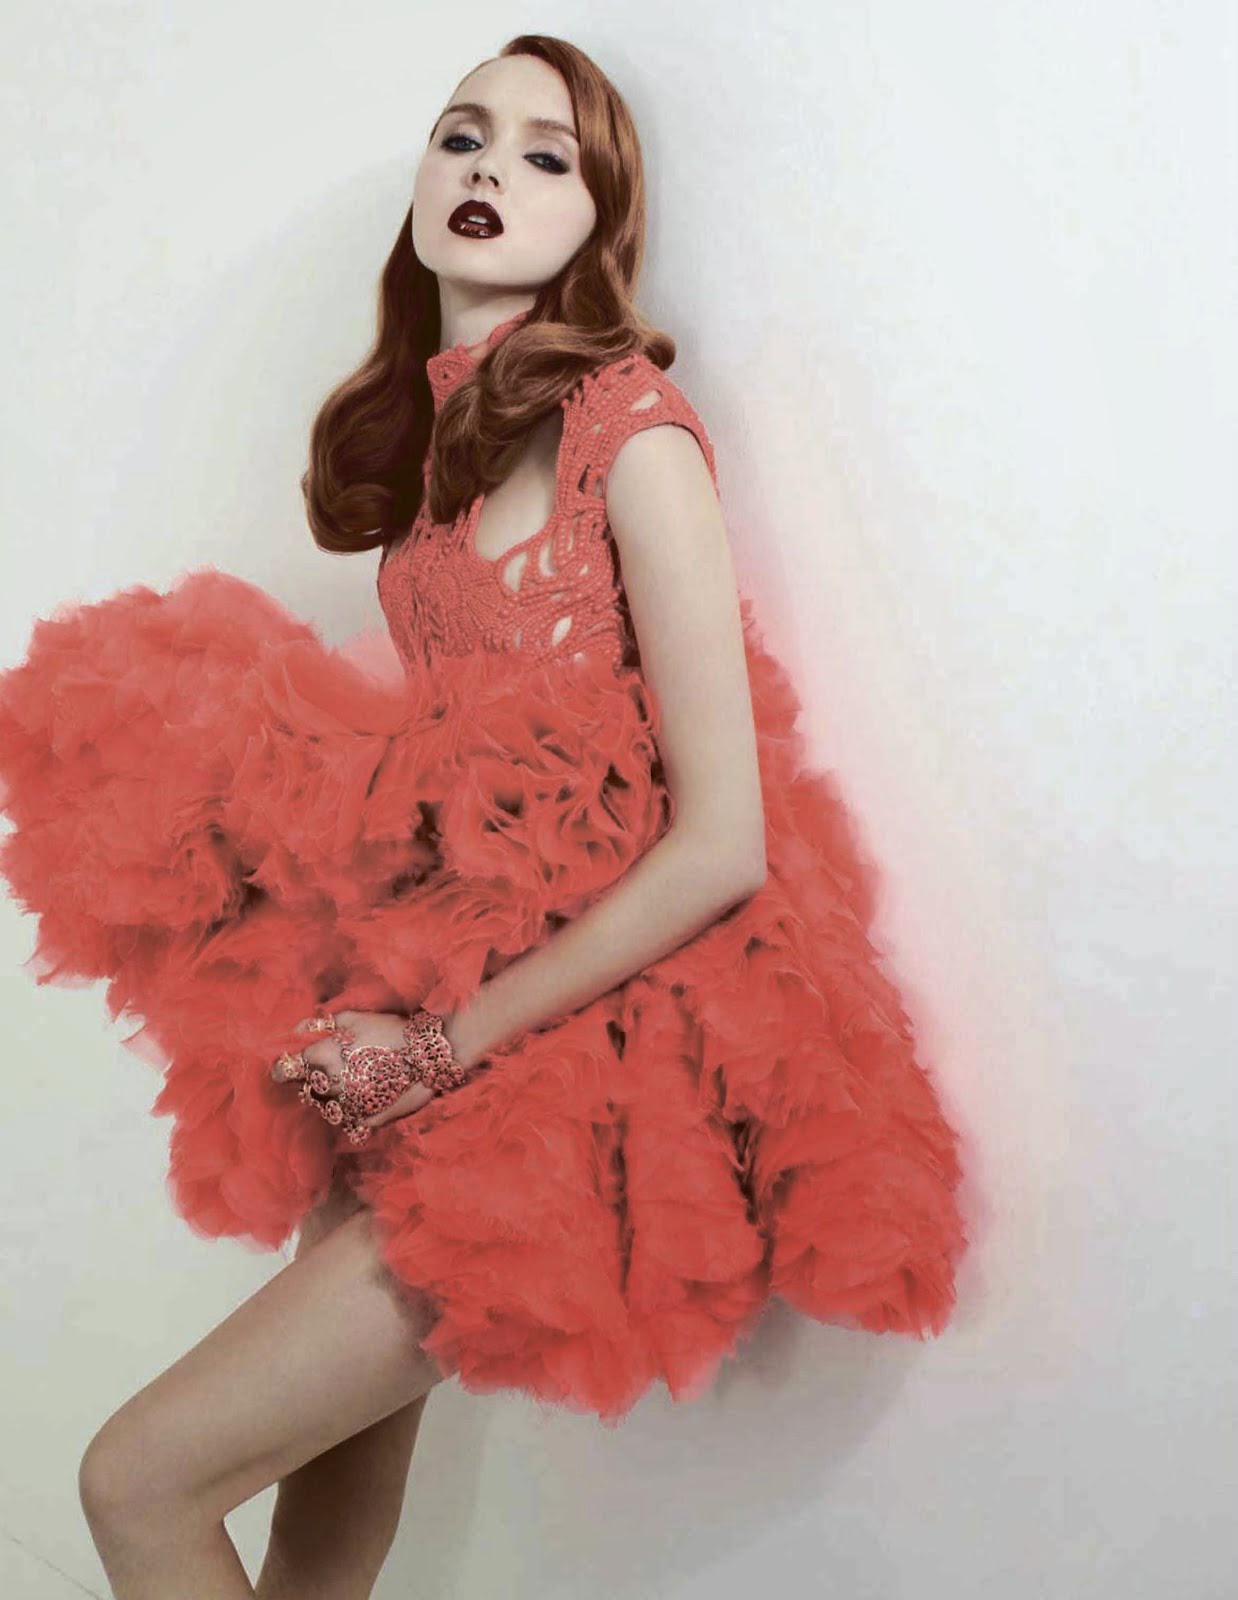 British supermodel Lily Cole in red dress